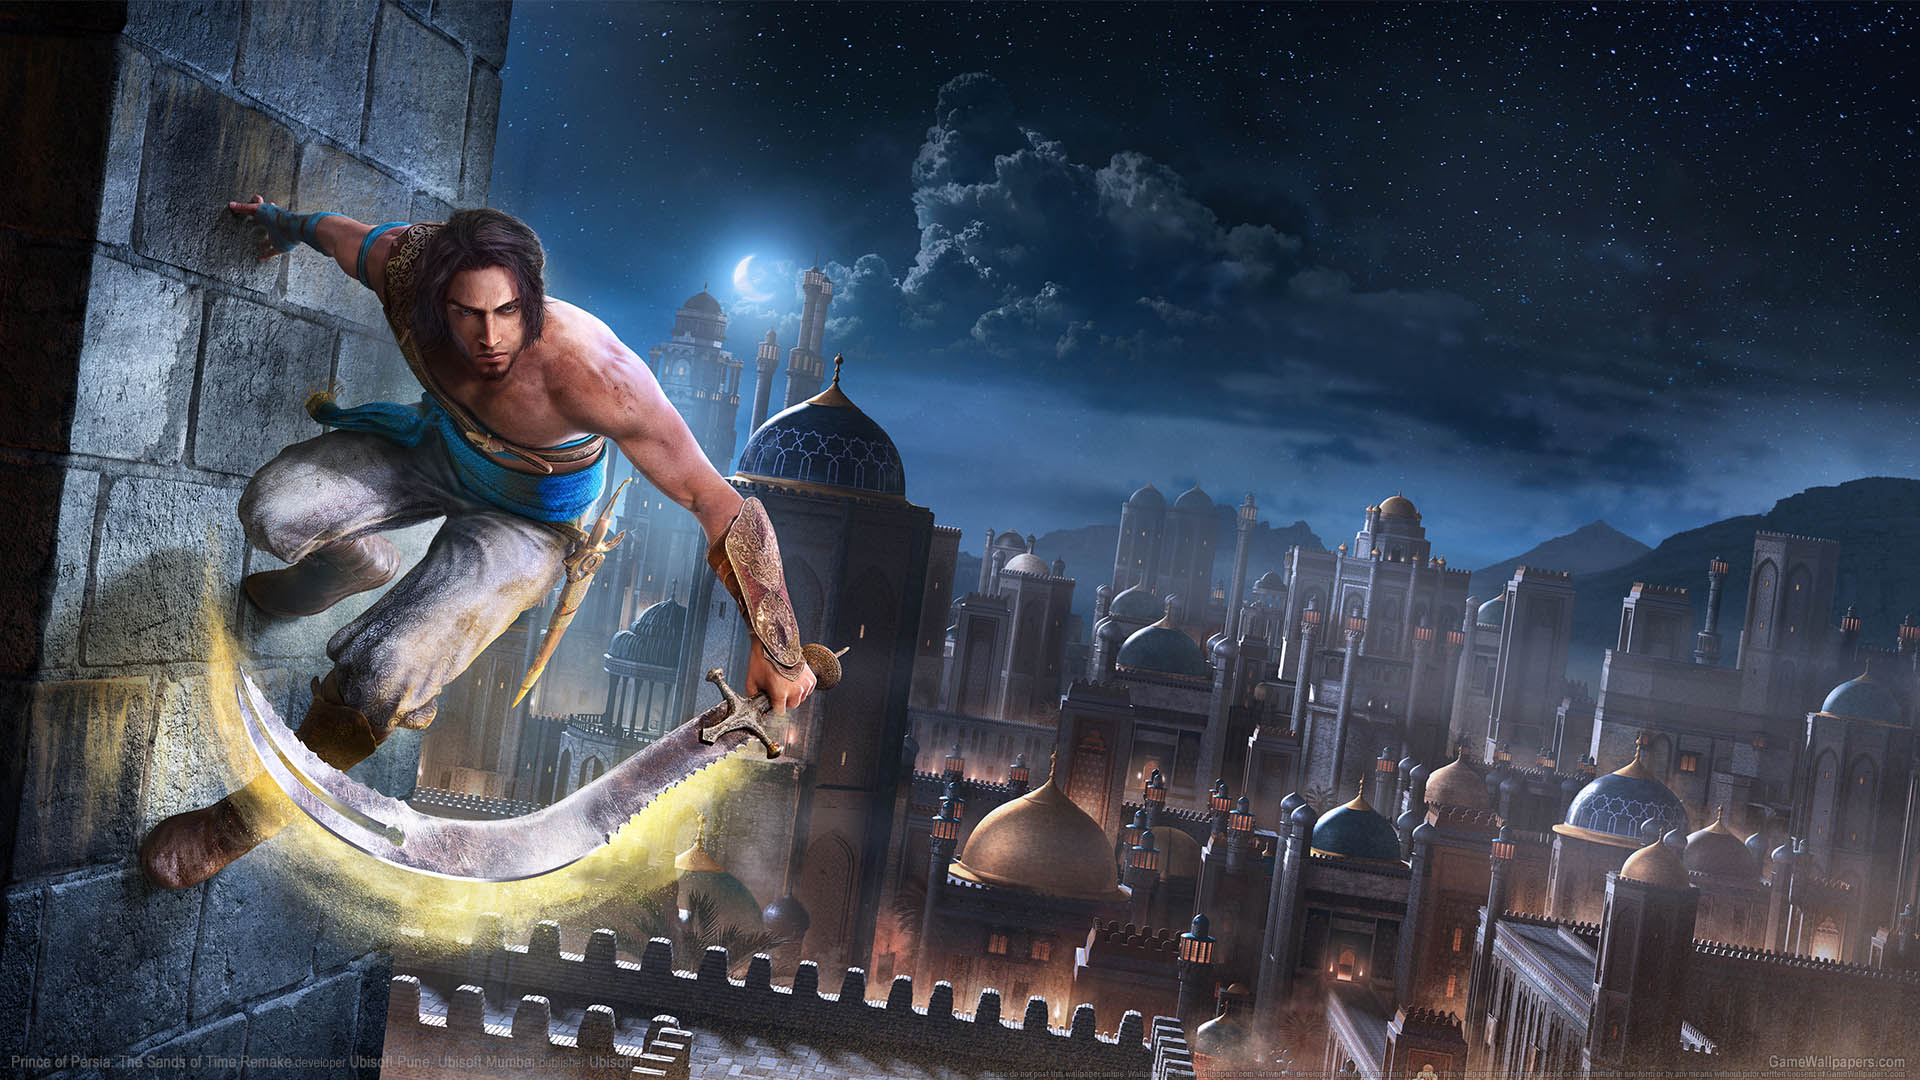 Prince of Persia: The Sands of Time Remake wallpaper 01 1920x1080